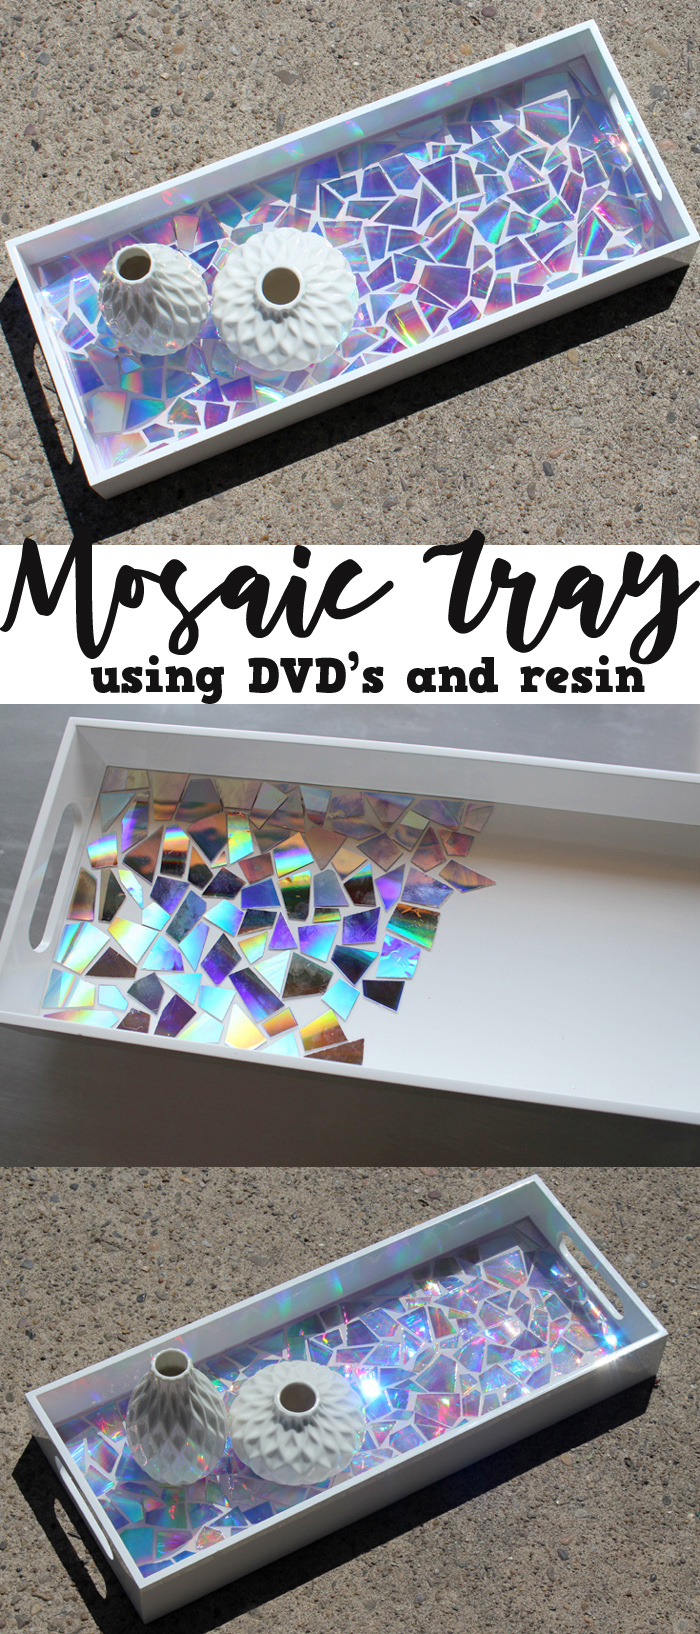 Use old DVD's as mosaic tiles and create a stunning work of art sealed with Envirotex Lite High Gloss resin finish.  Awesome Recycled/repurposed craft DIY! via @resincraftsblog